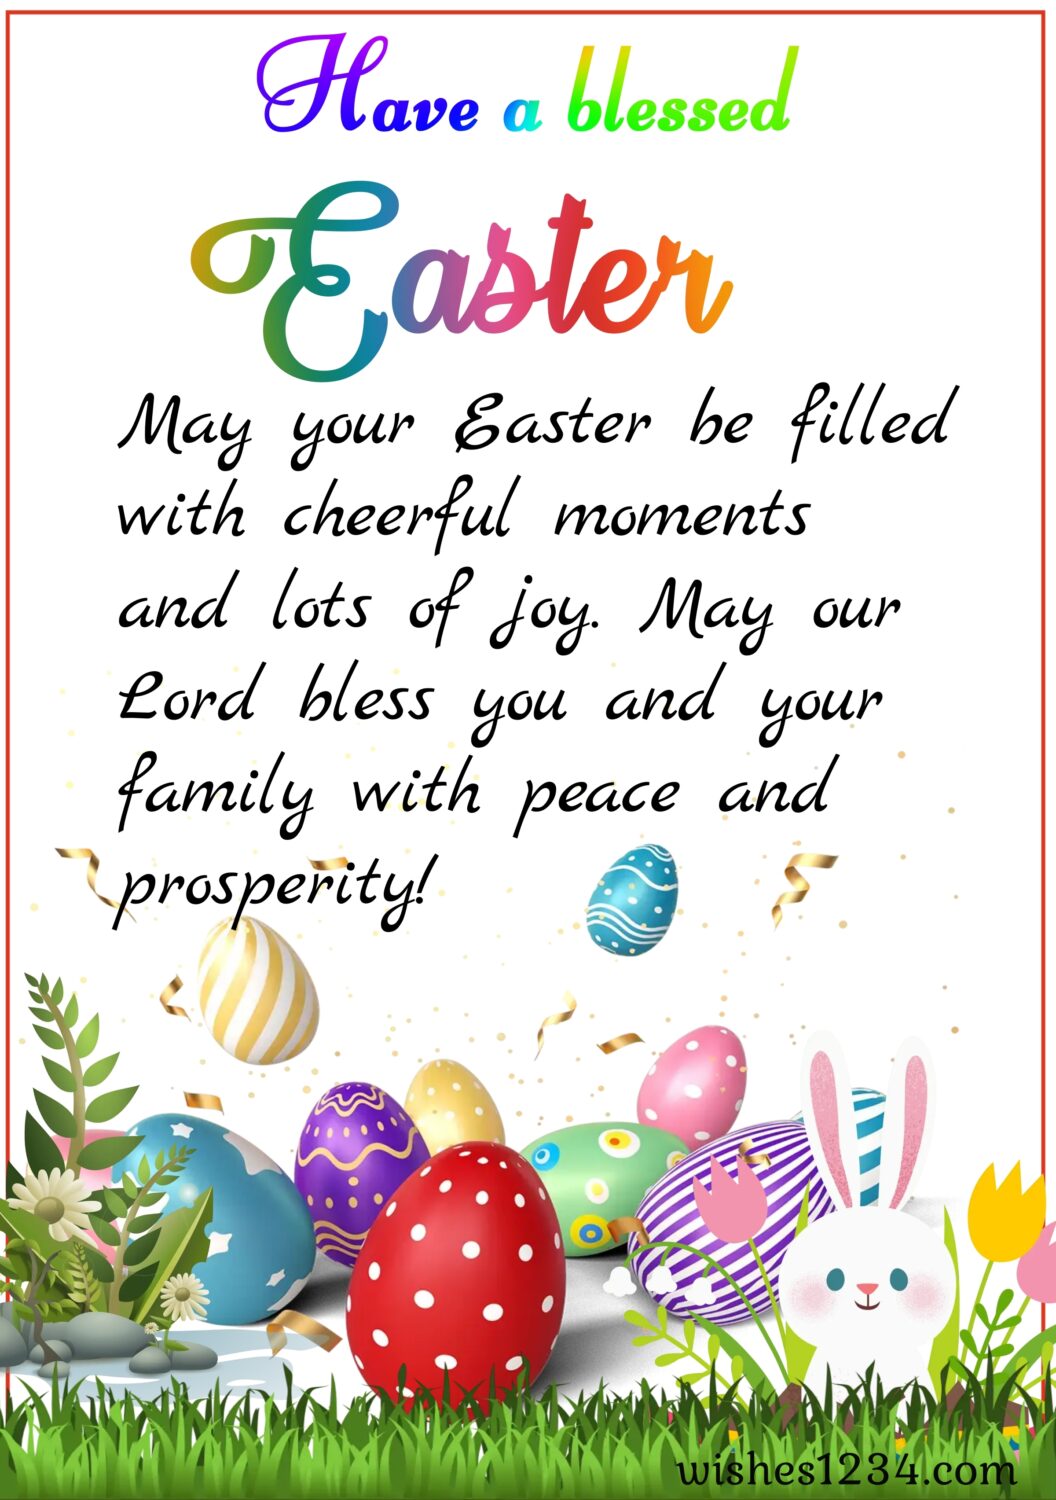 Easter blessings with easter eggs, Happy Easter Wishes, Quotes & Images.